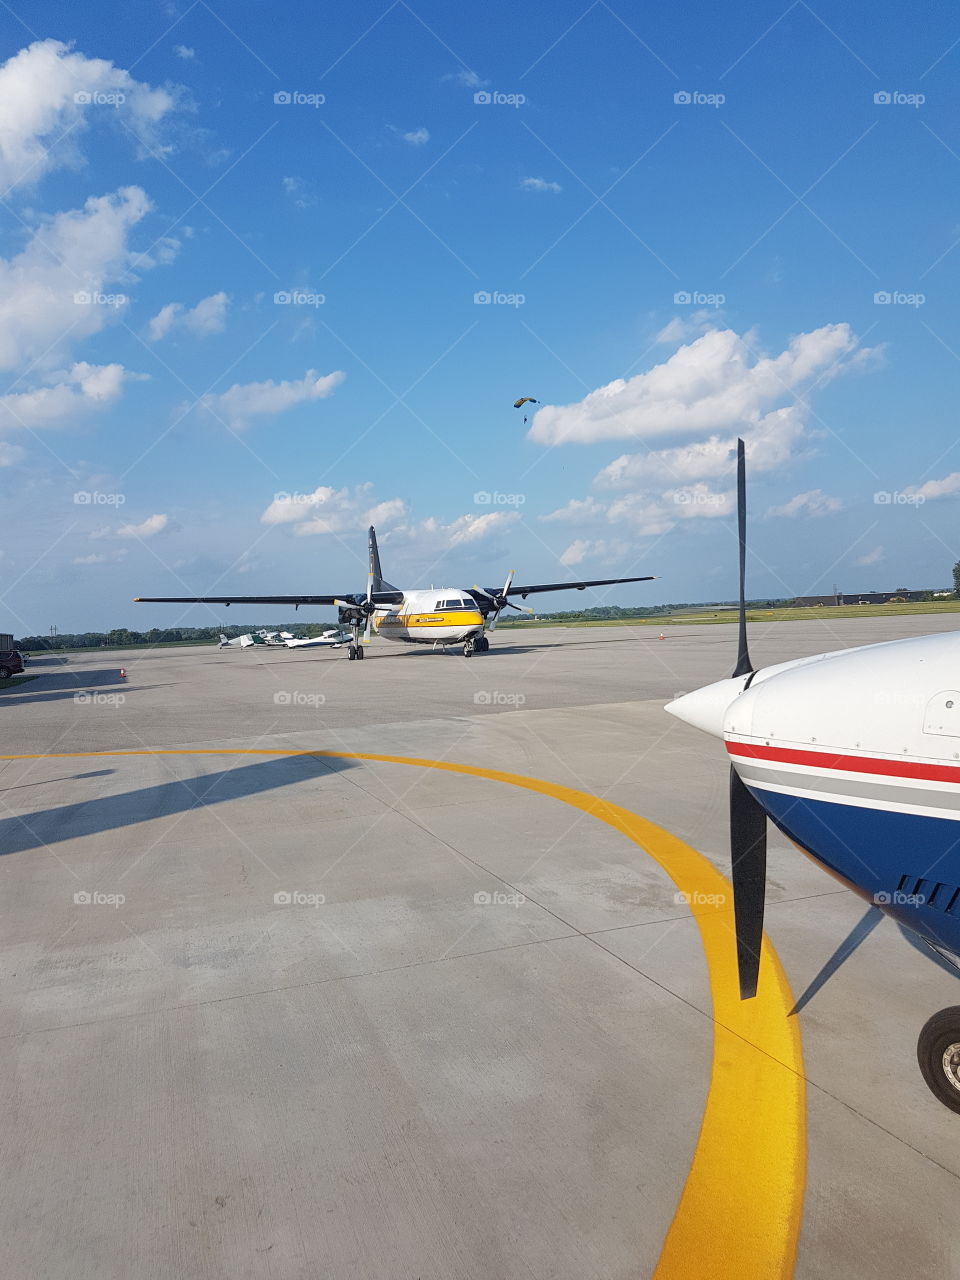 US Army Golden Knights plane on runway, prop and nose of small plane on foreground, sky diver parachuting down. Bright blue sky with fluffy clouds